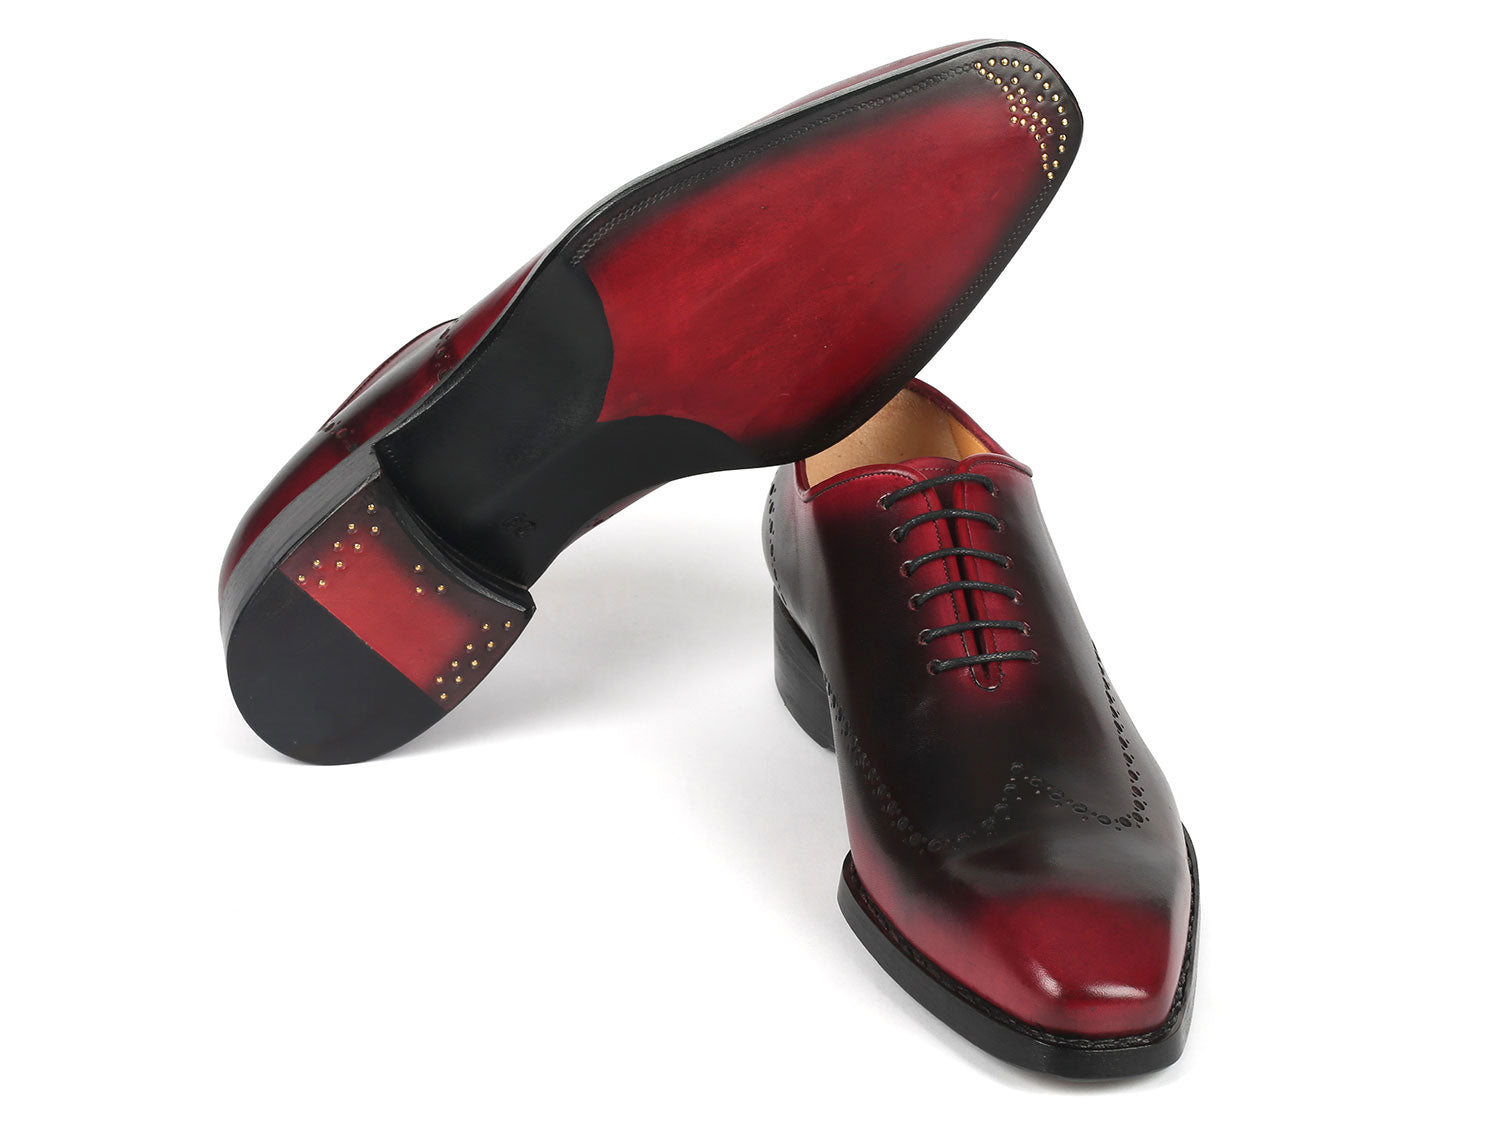 Paul Parkman Goodyear Welted Red & Black Oxford Shoes - 081-B51